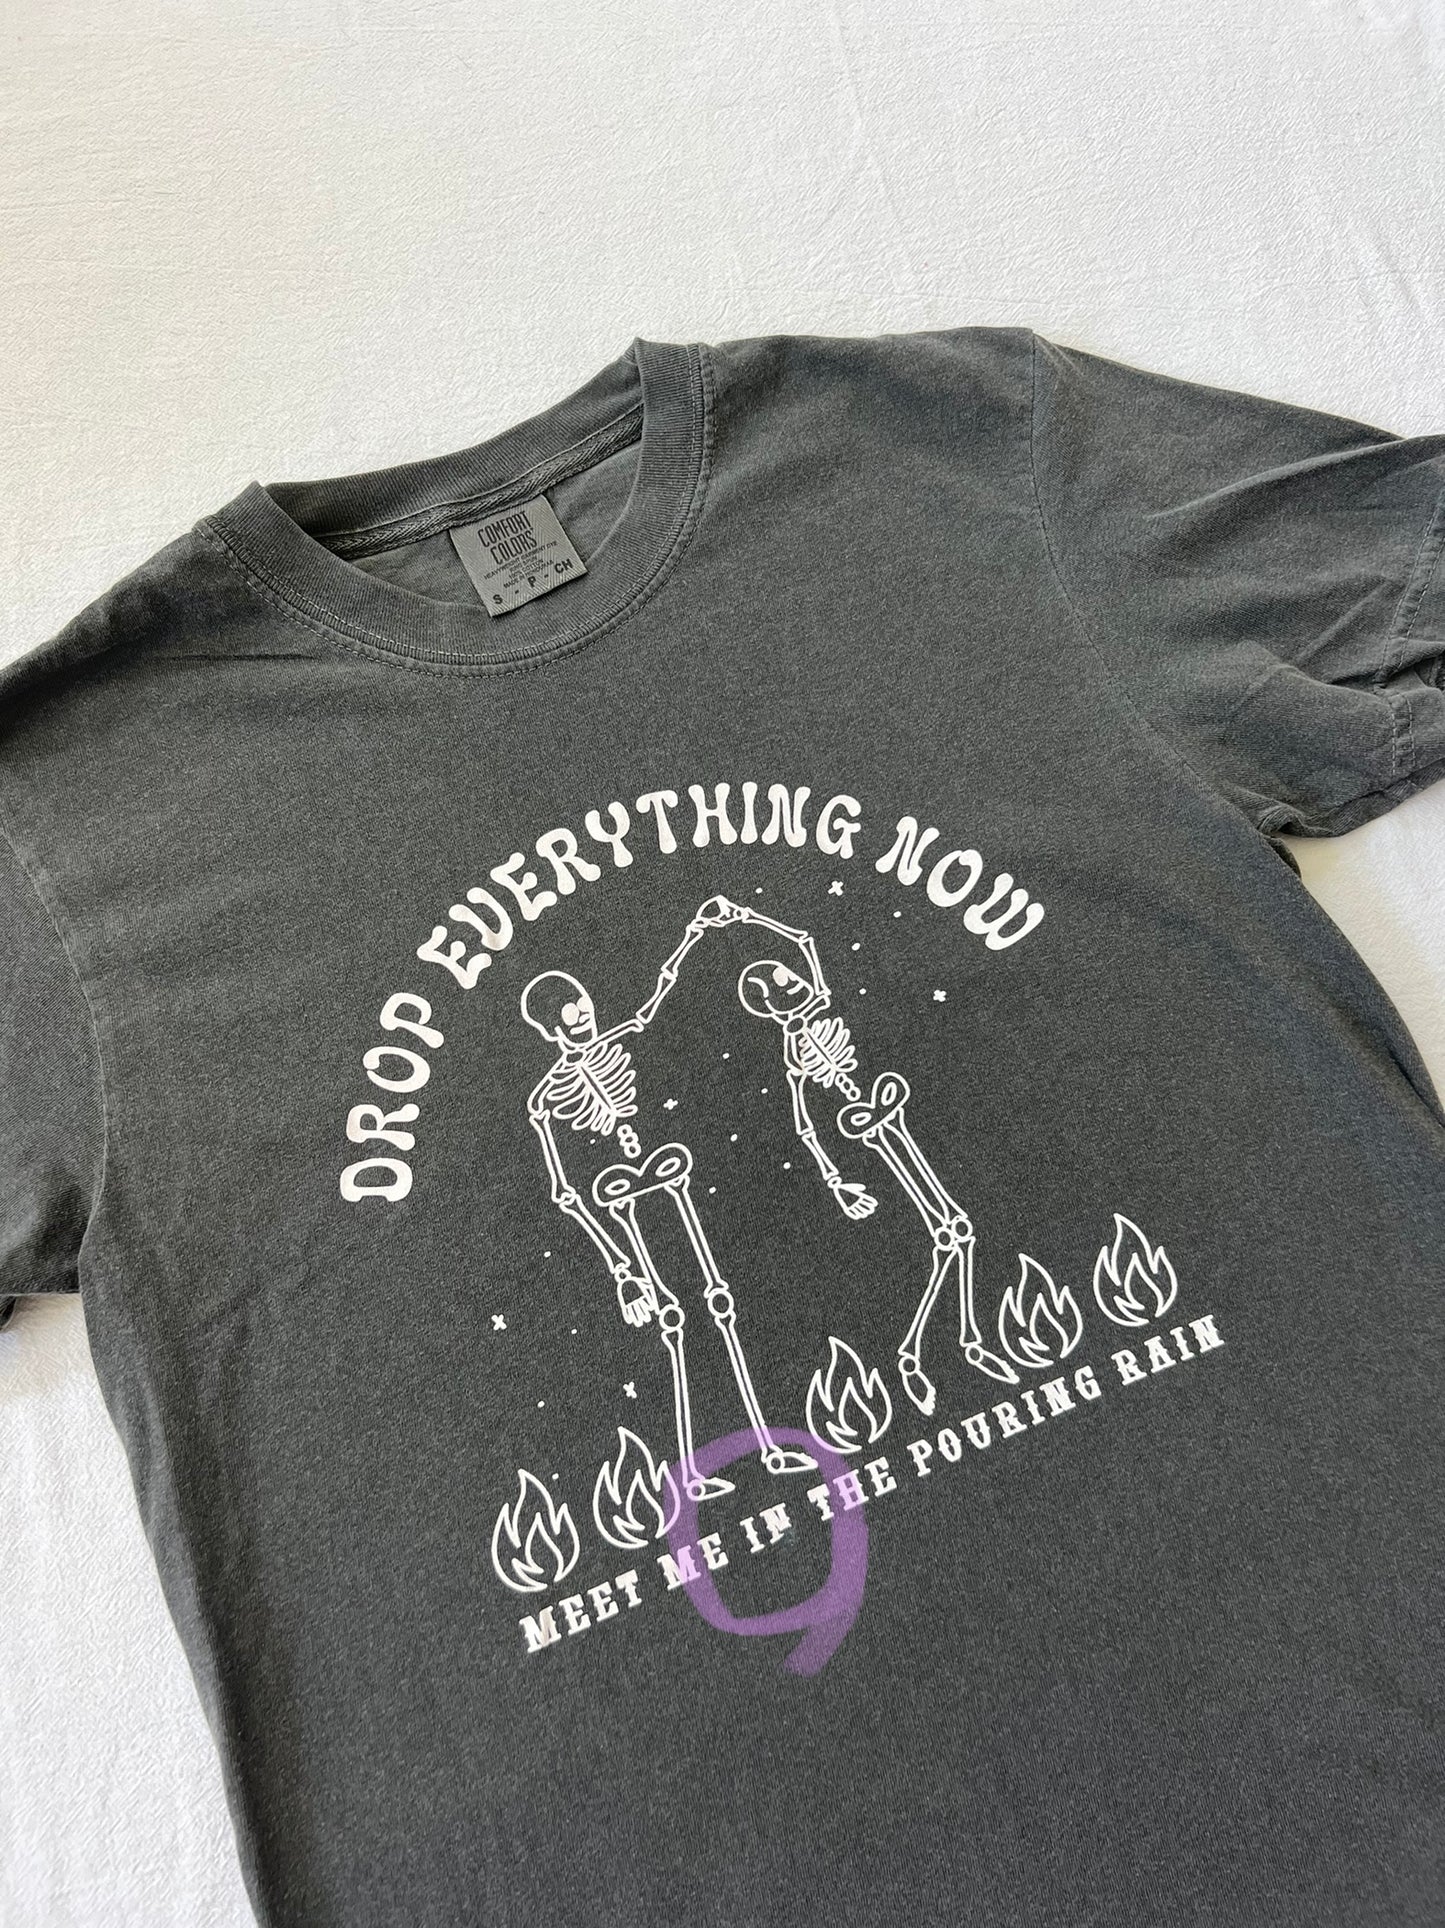 Drop Everything Now Tee: Size S (OOPSIE SHIRT)